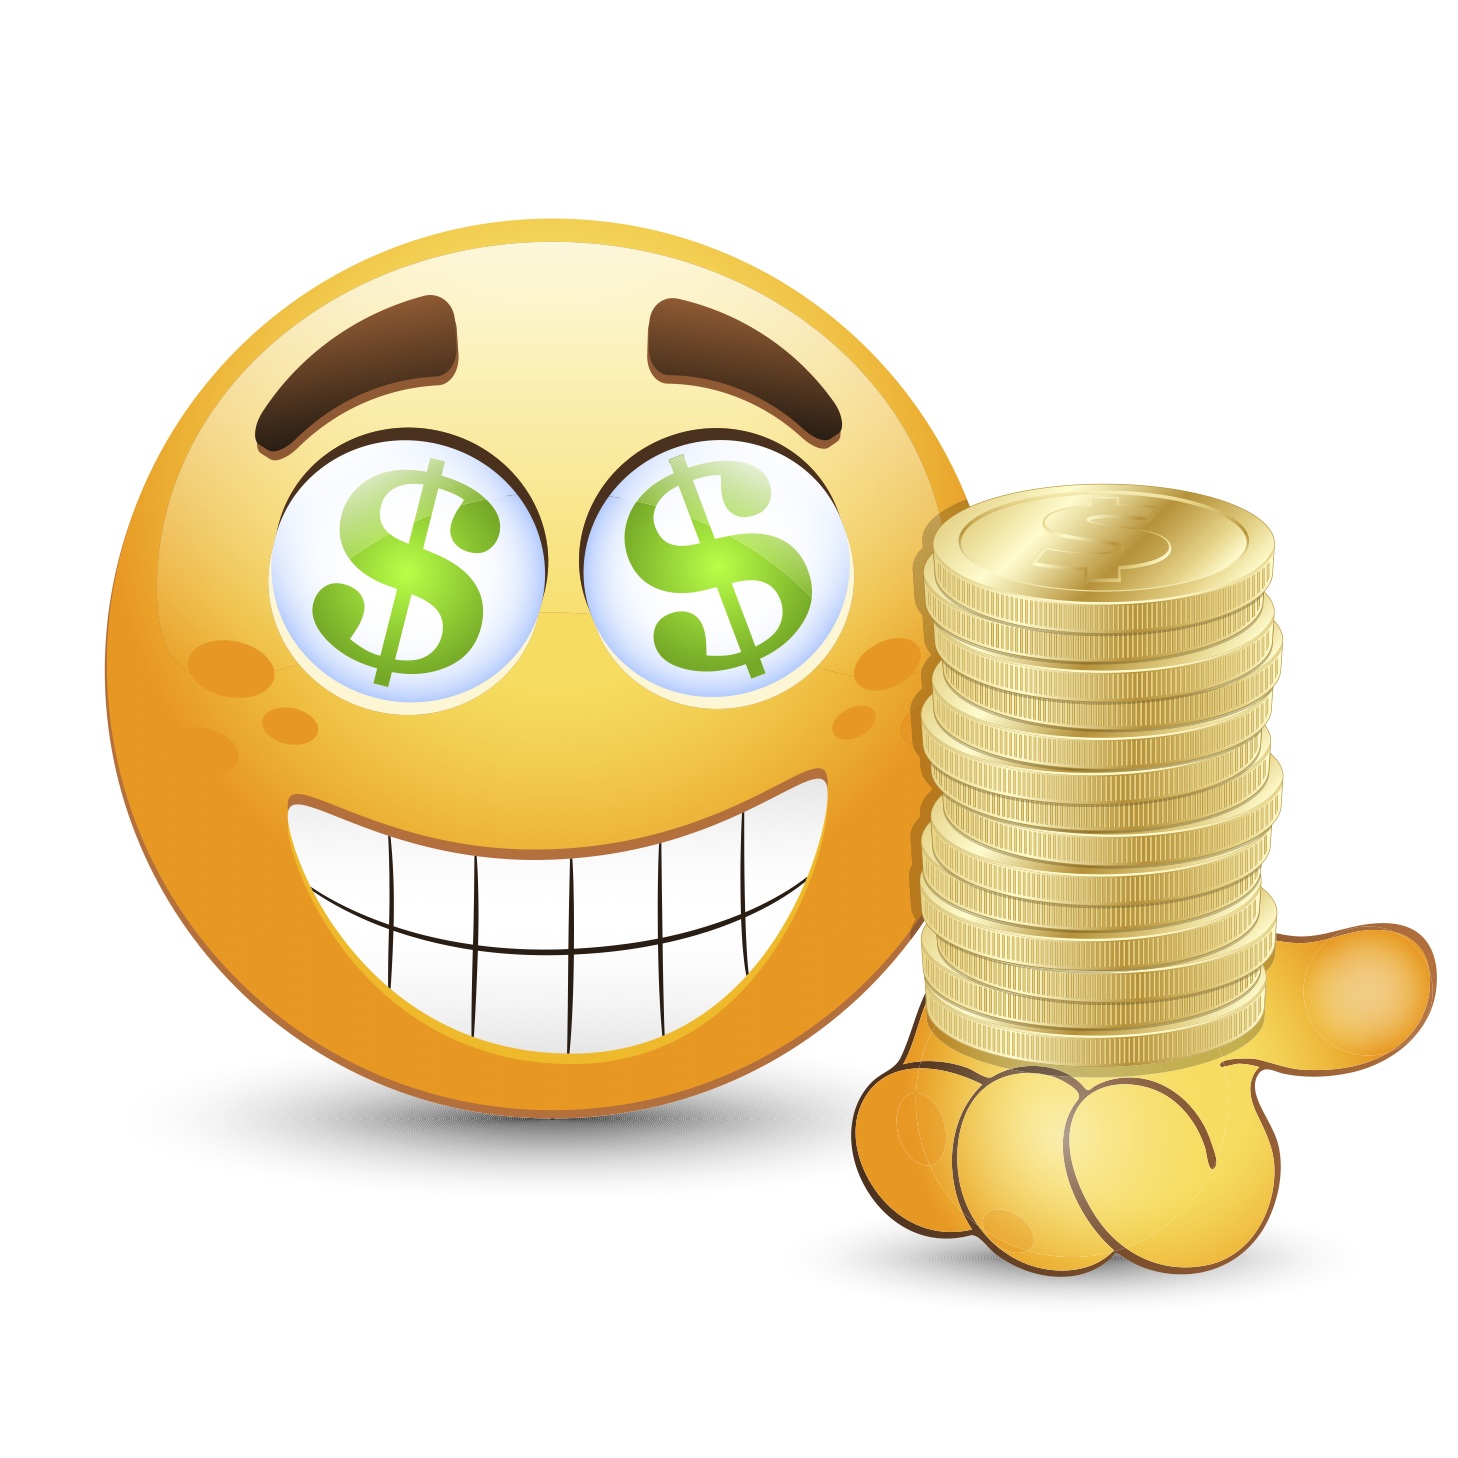 Dollar Signs Images - ClipArt Best